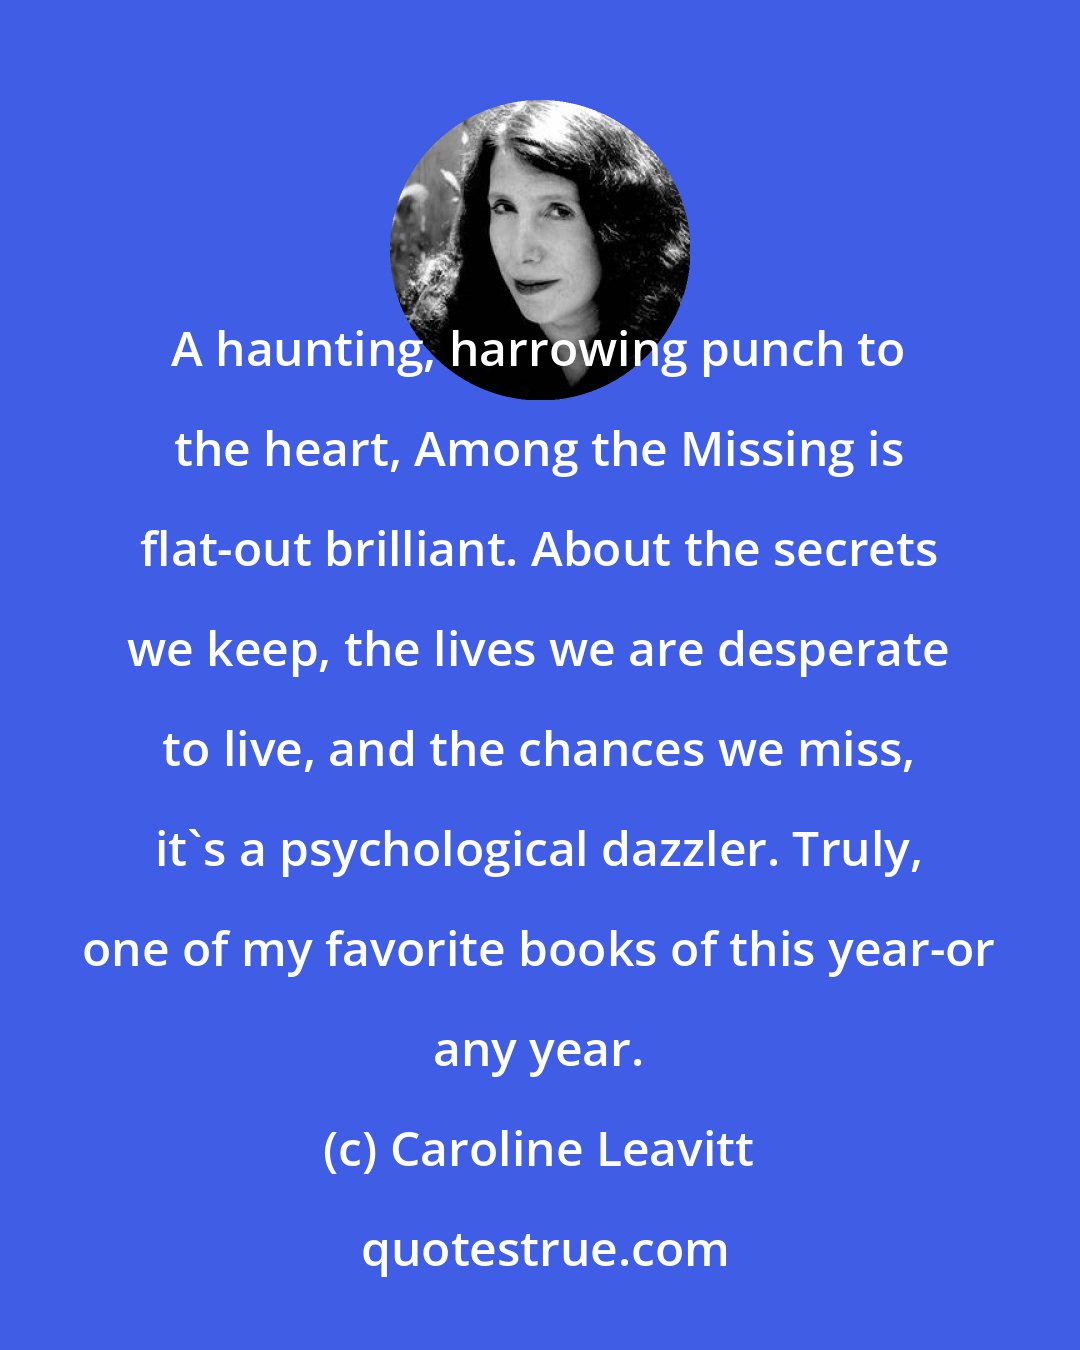 Caroline Leavitt: A haunting, harrowing punch to the heart, Among the Missing is flat-out brilliant. About the secrets we keep, the lives we are desperate to live, and the chances we miss, it's a psychological dazzler. Truly, one of my favorite books of this year-or any year.